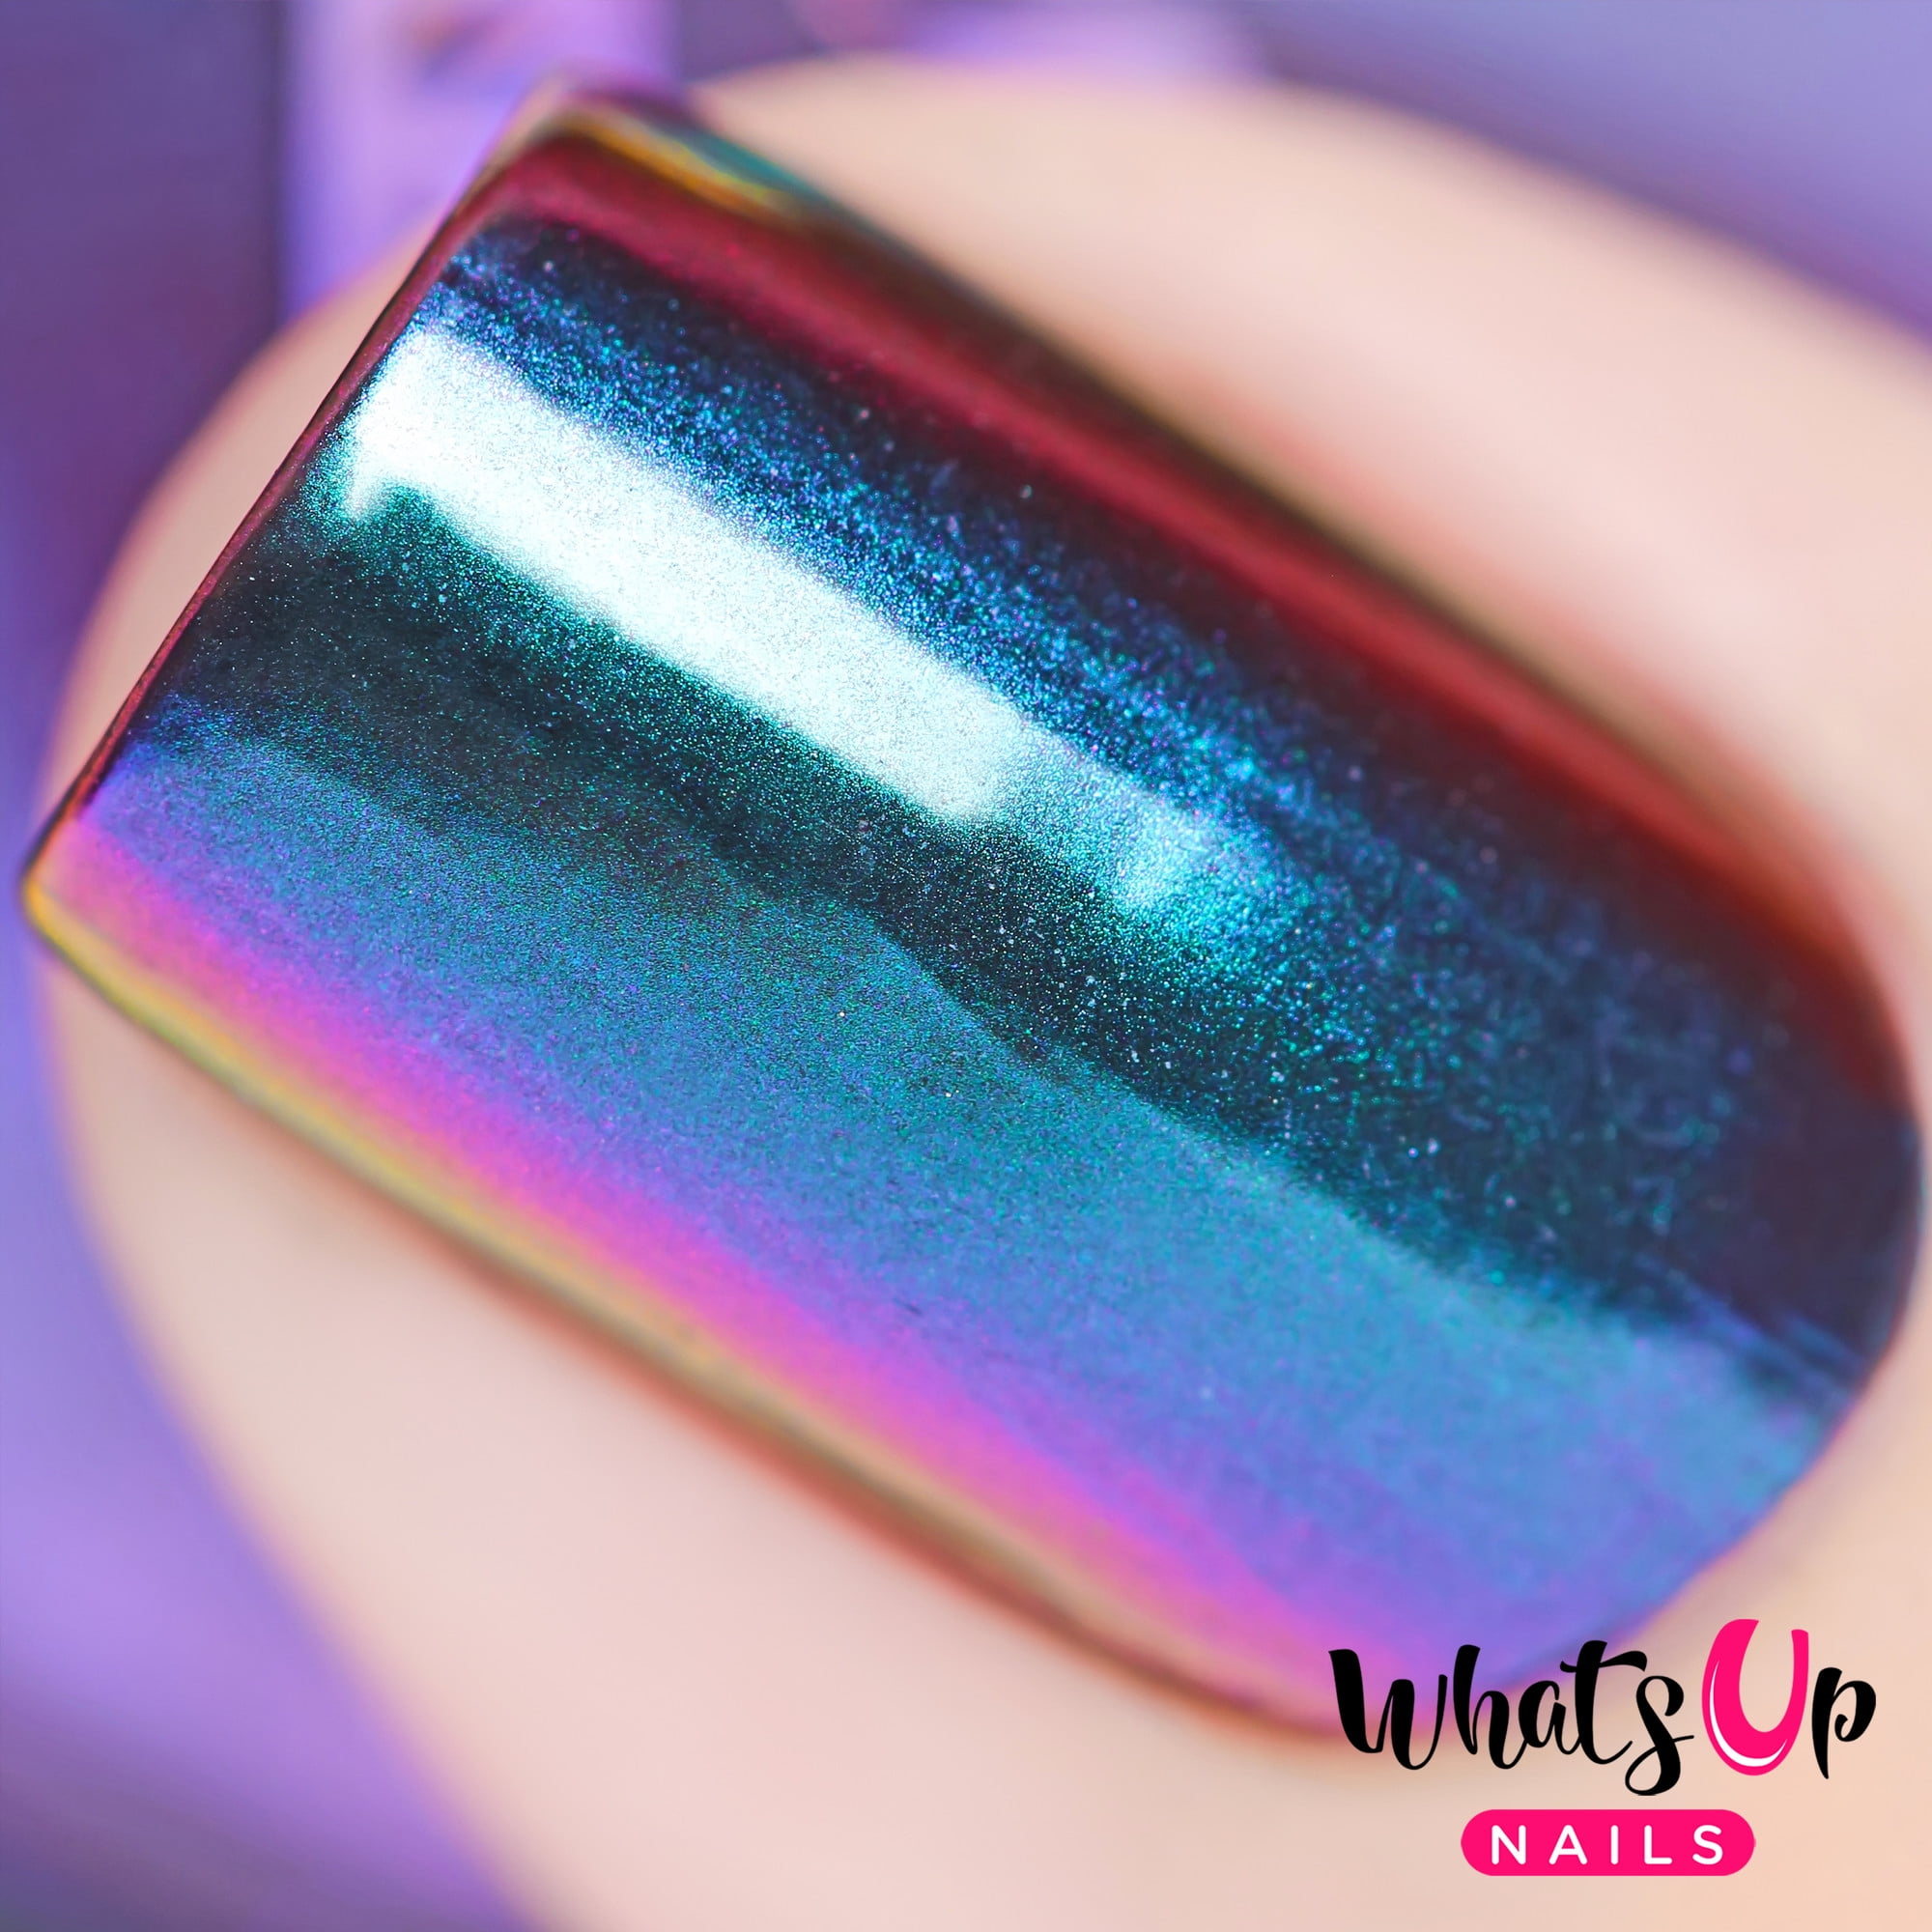 Whats Up Nails - Dream Powder Magic Color Shifting Pigment with Multi